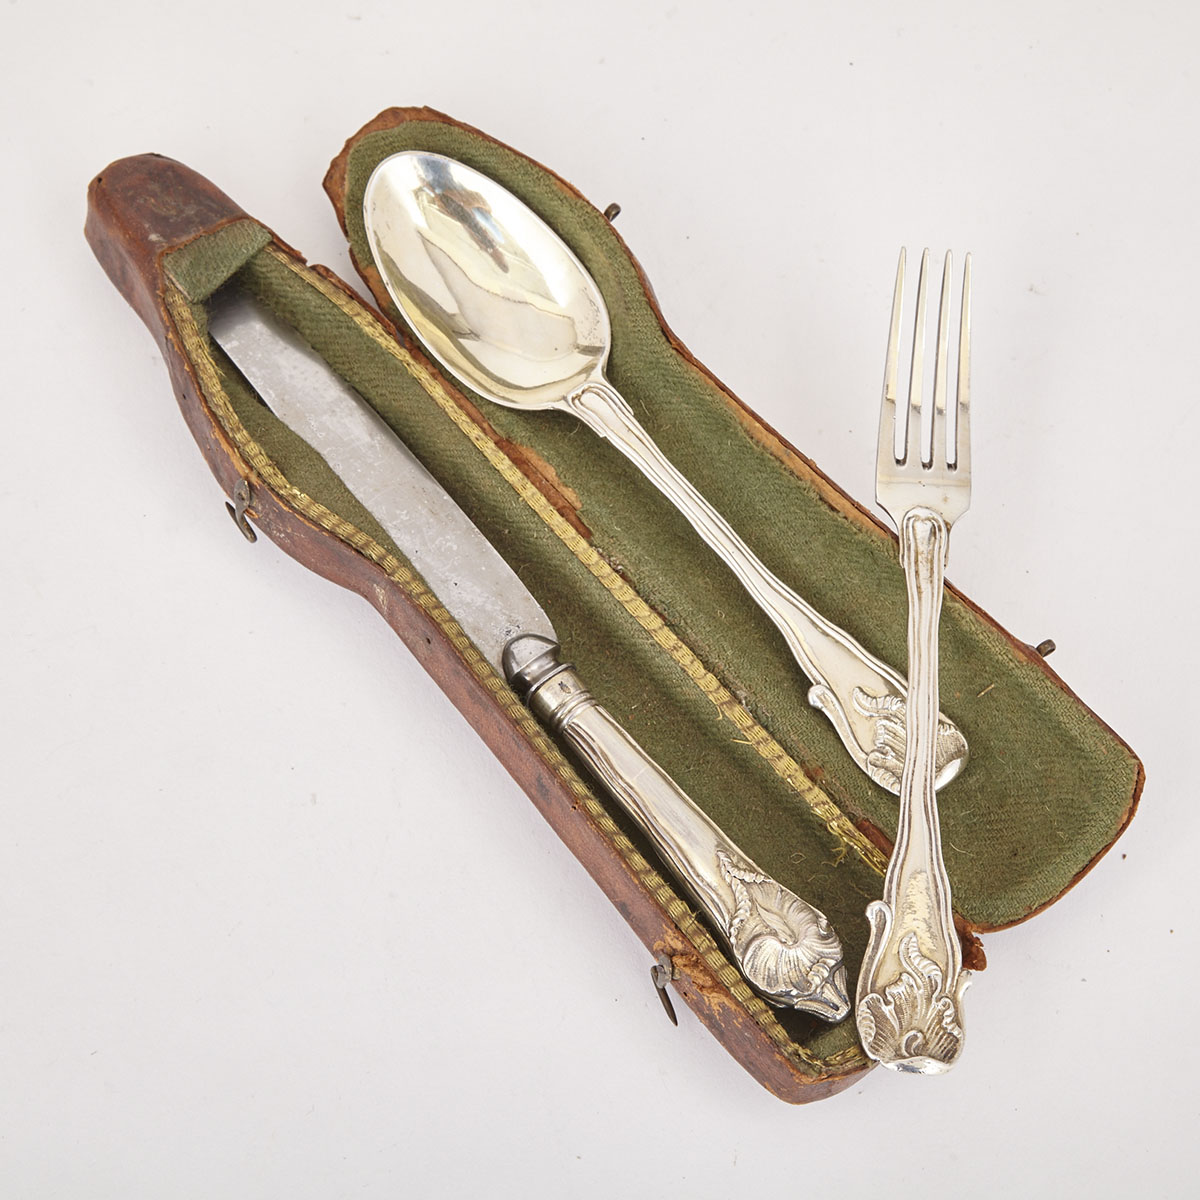 German Silver-Gilt Knife, Fork and Spoon, Dresden, 19th century